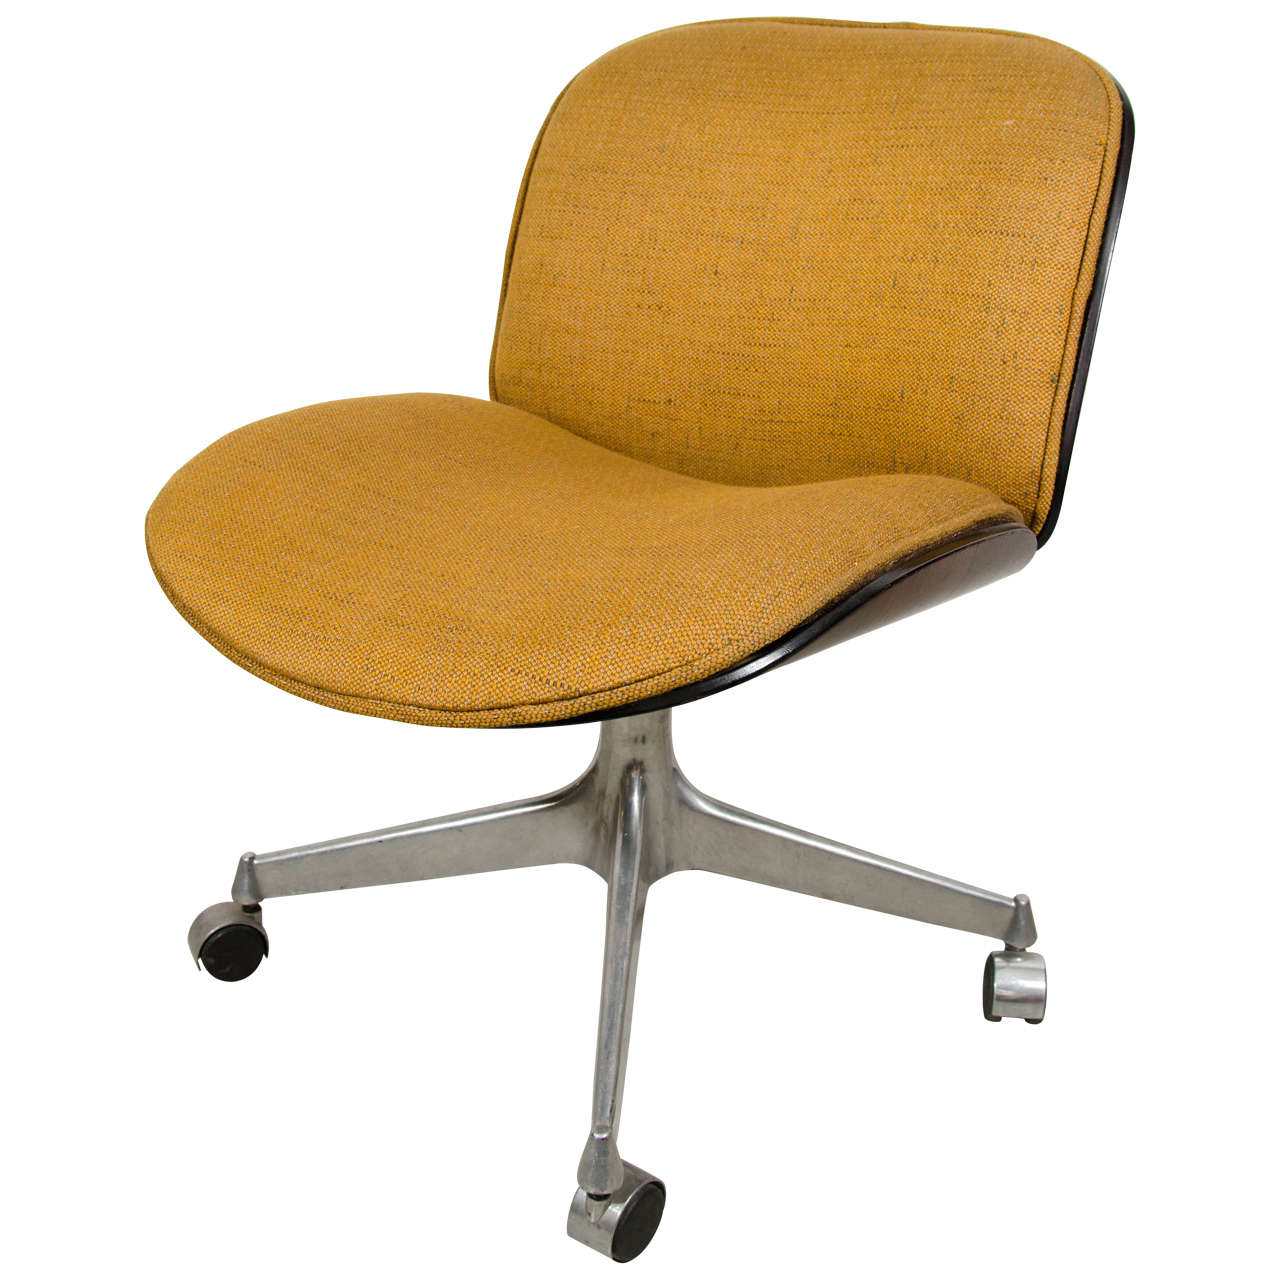 Ico Parisi for MIM Desk Chair with Fabric Seat For Sale